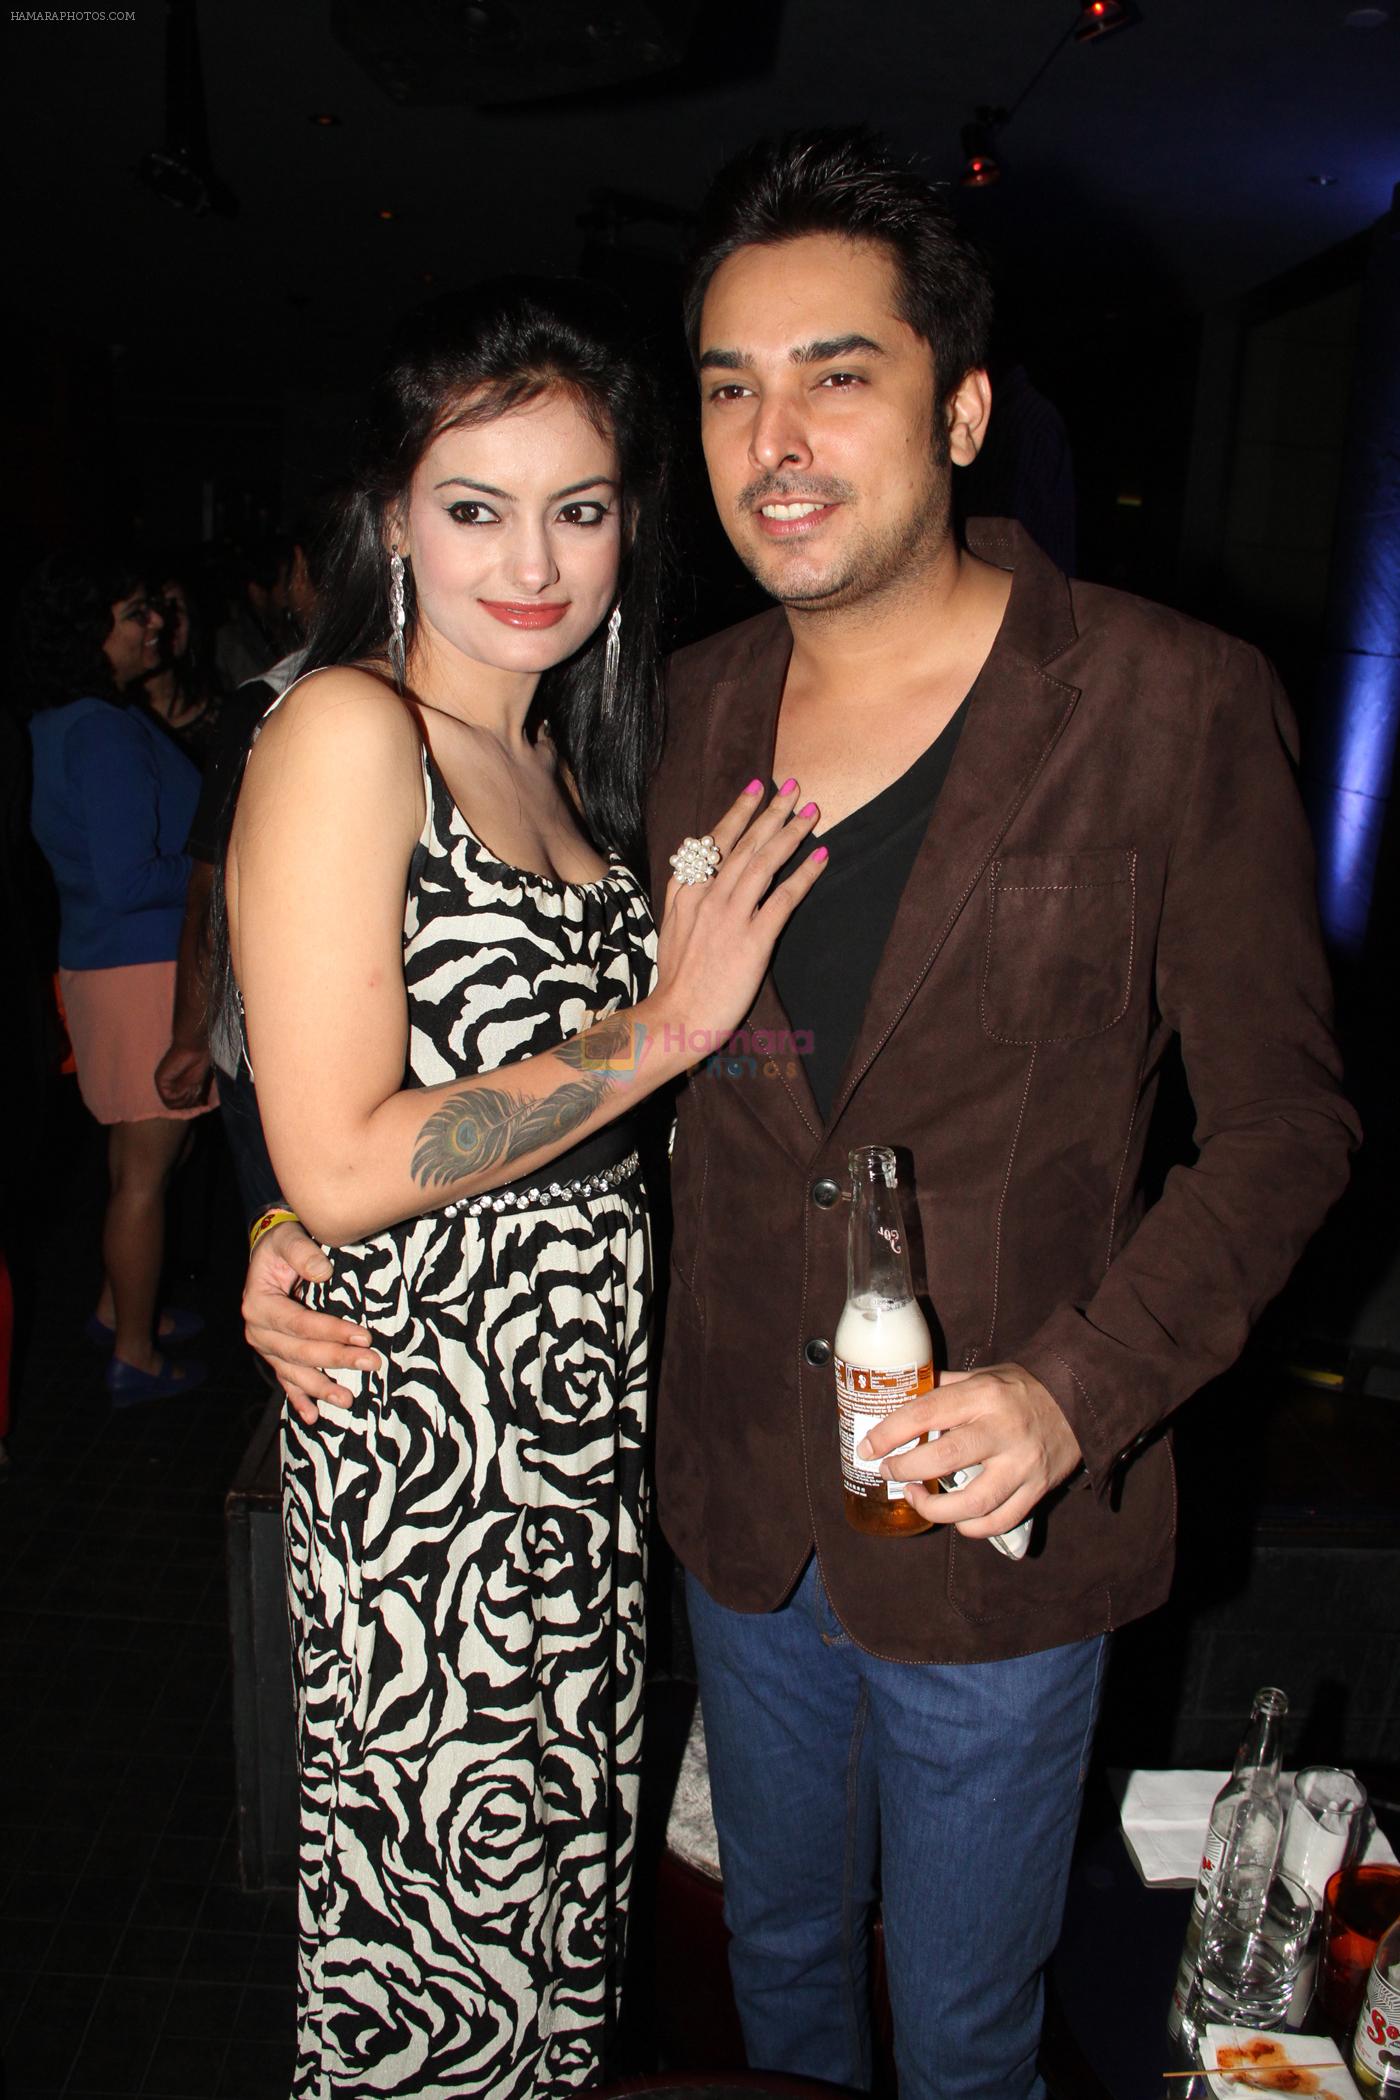 sia tara and shikhar siddharth at SOL FHM Club Cras Nights Launch party hosted in Anidra, The Aman Hotel on 7th Nov 2012